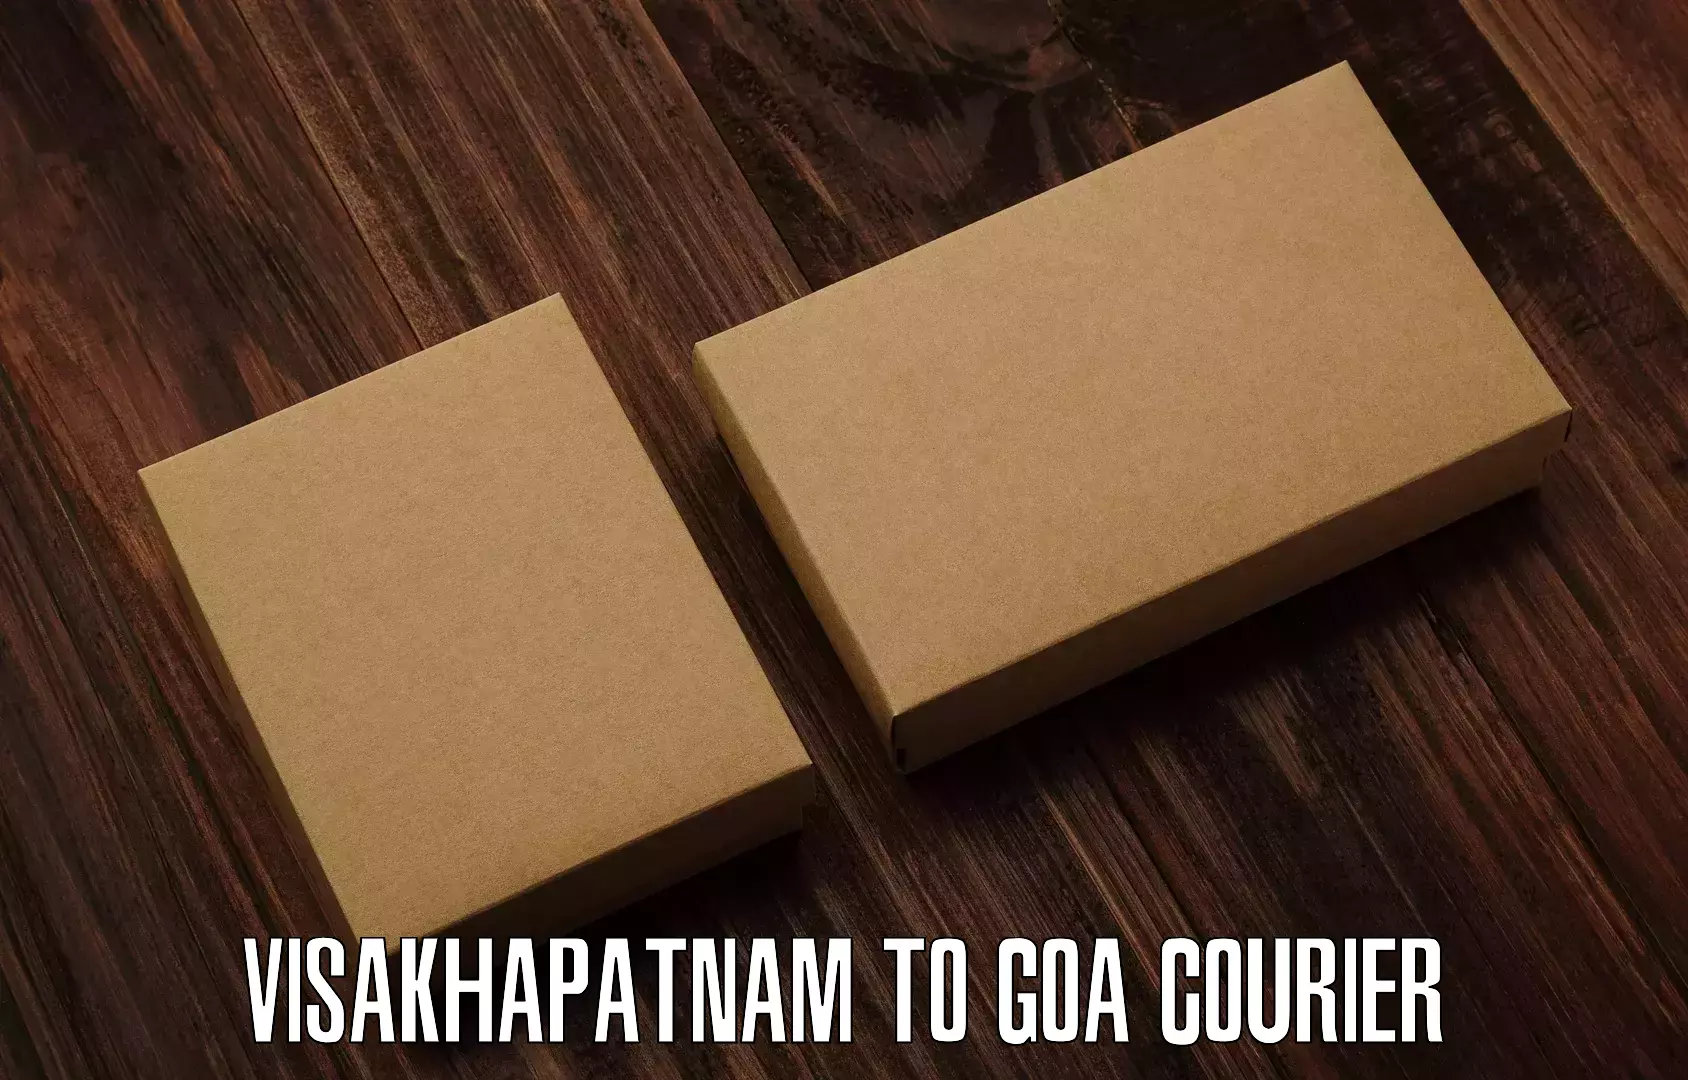 Subscription-based courier Visakhapatnam to Goa